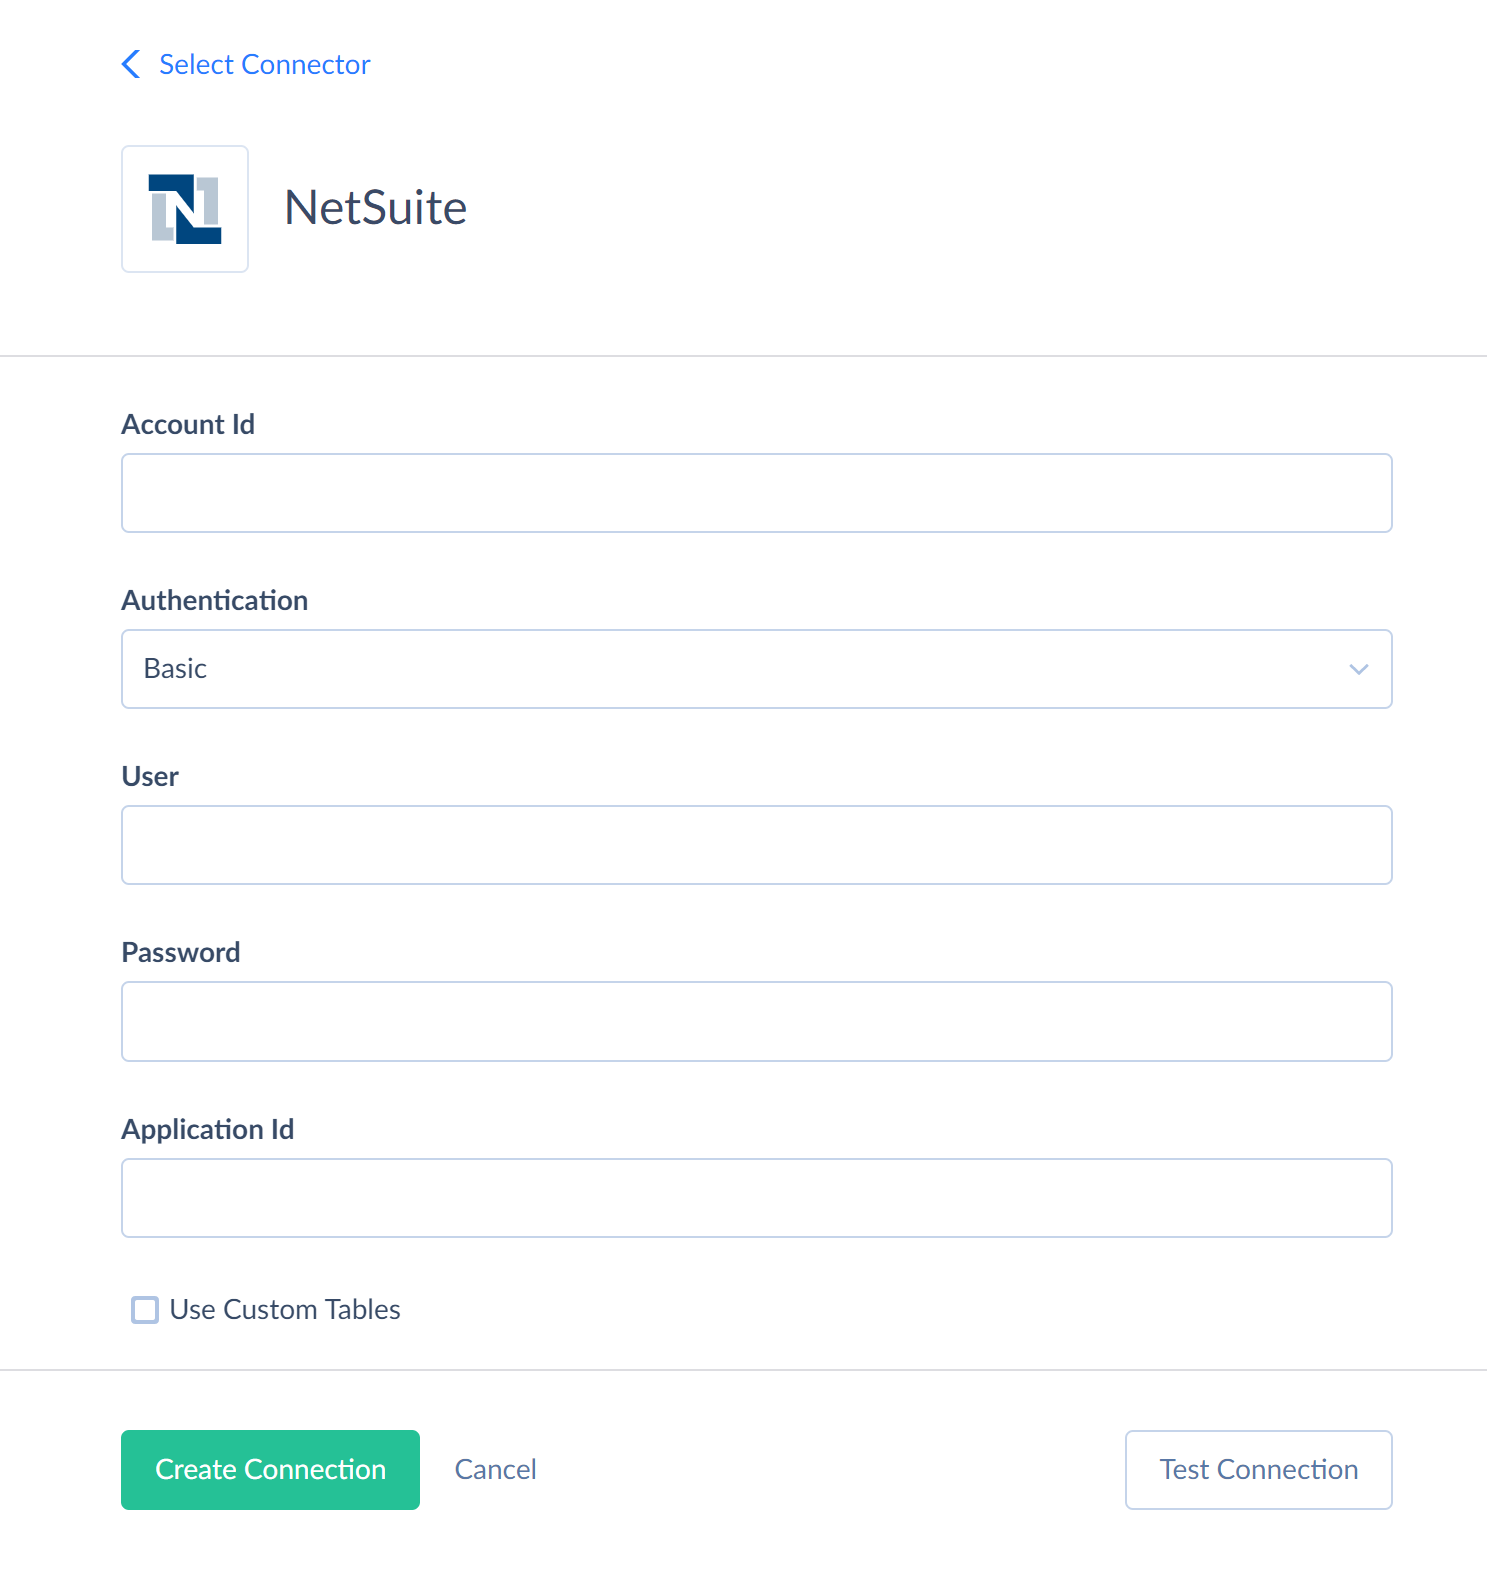 NetSuite connection editor - basic authentication